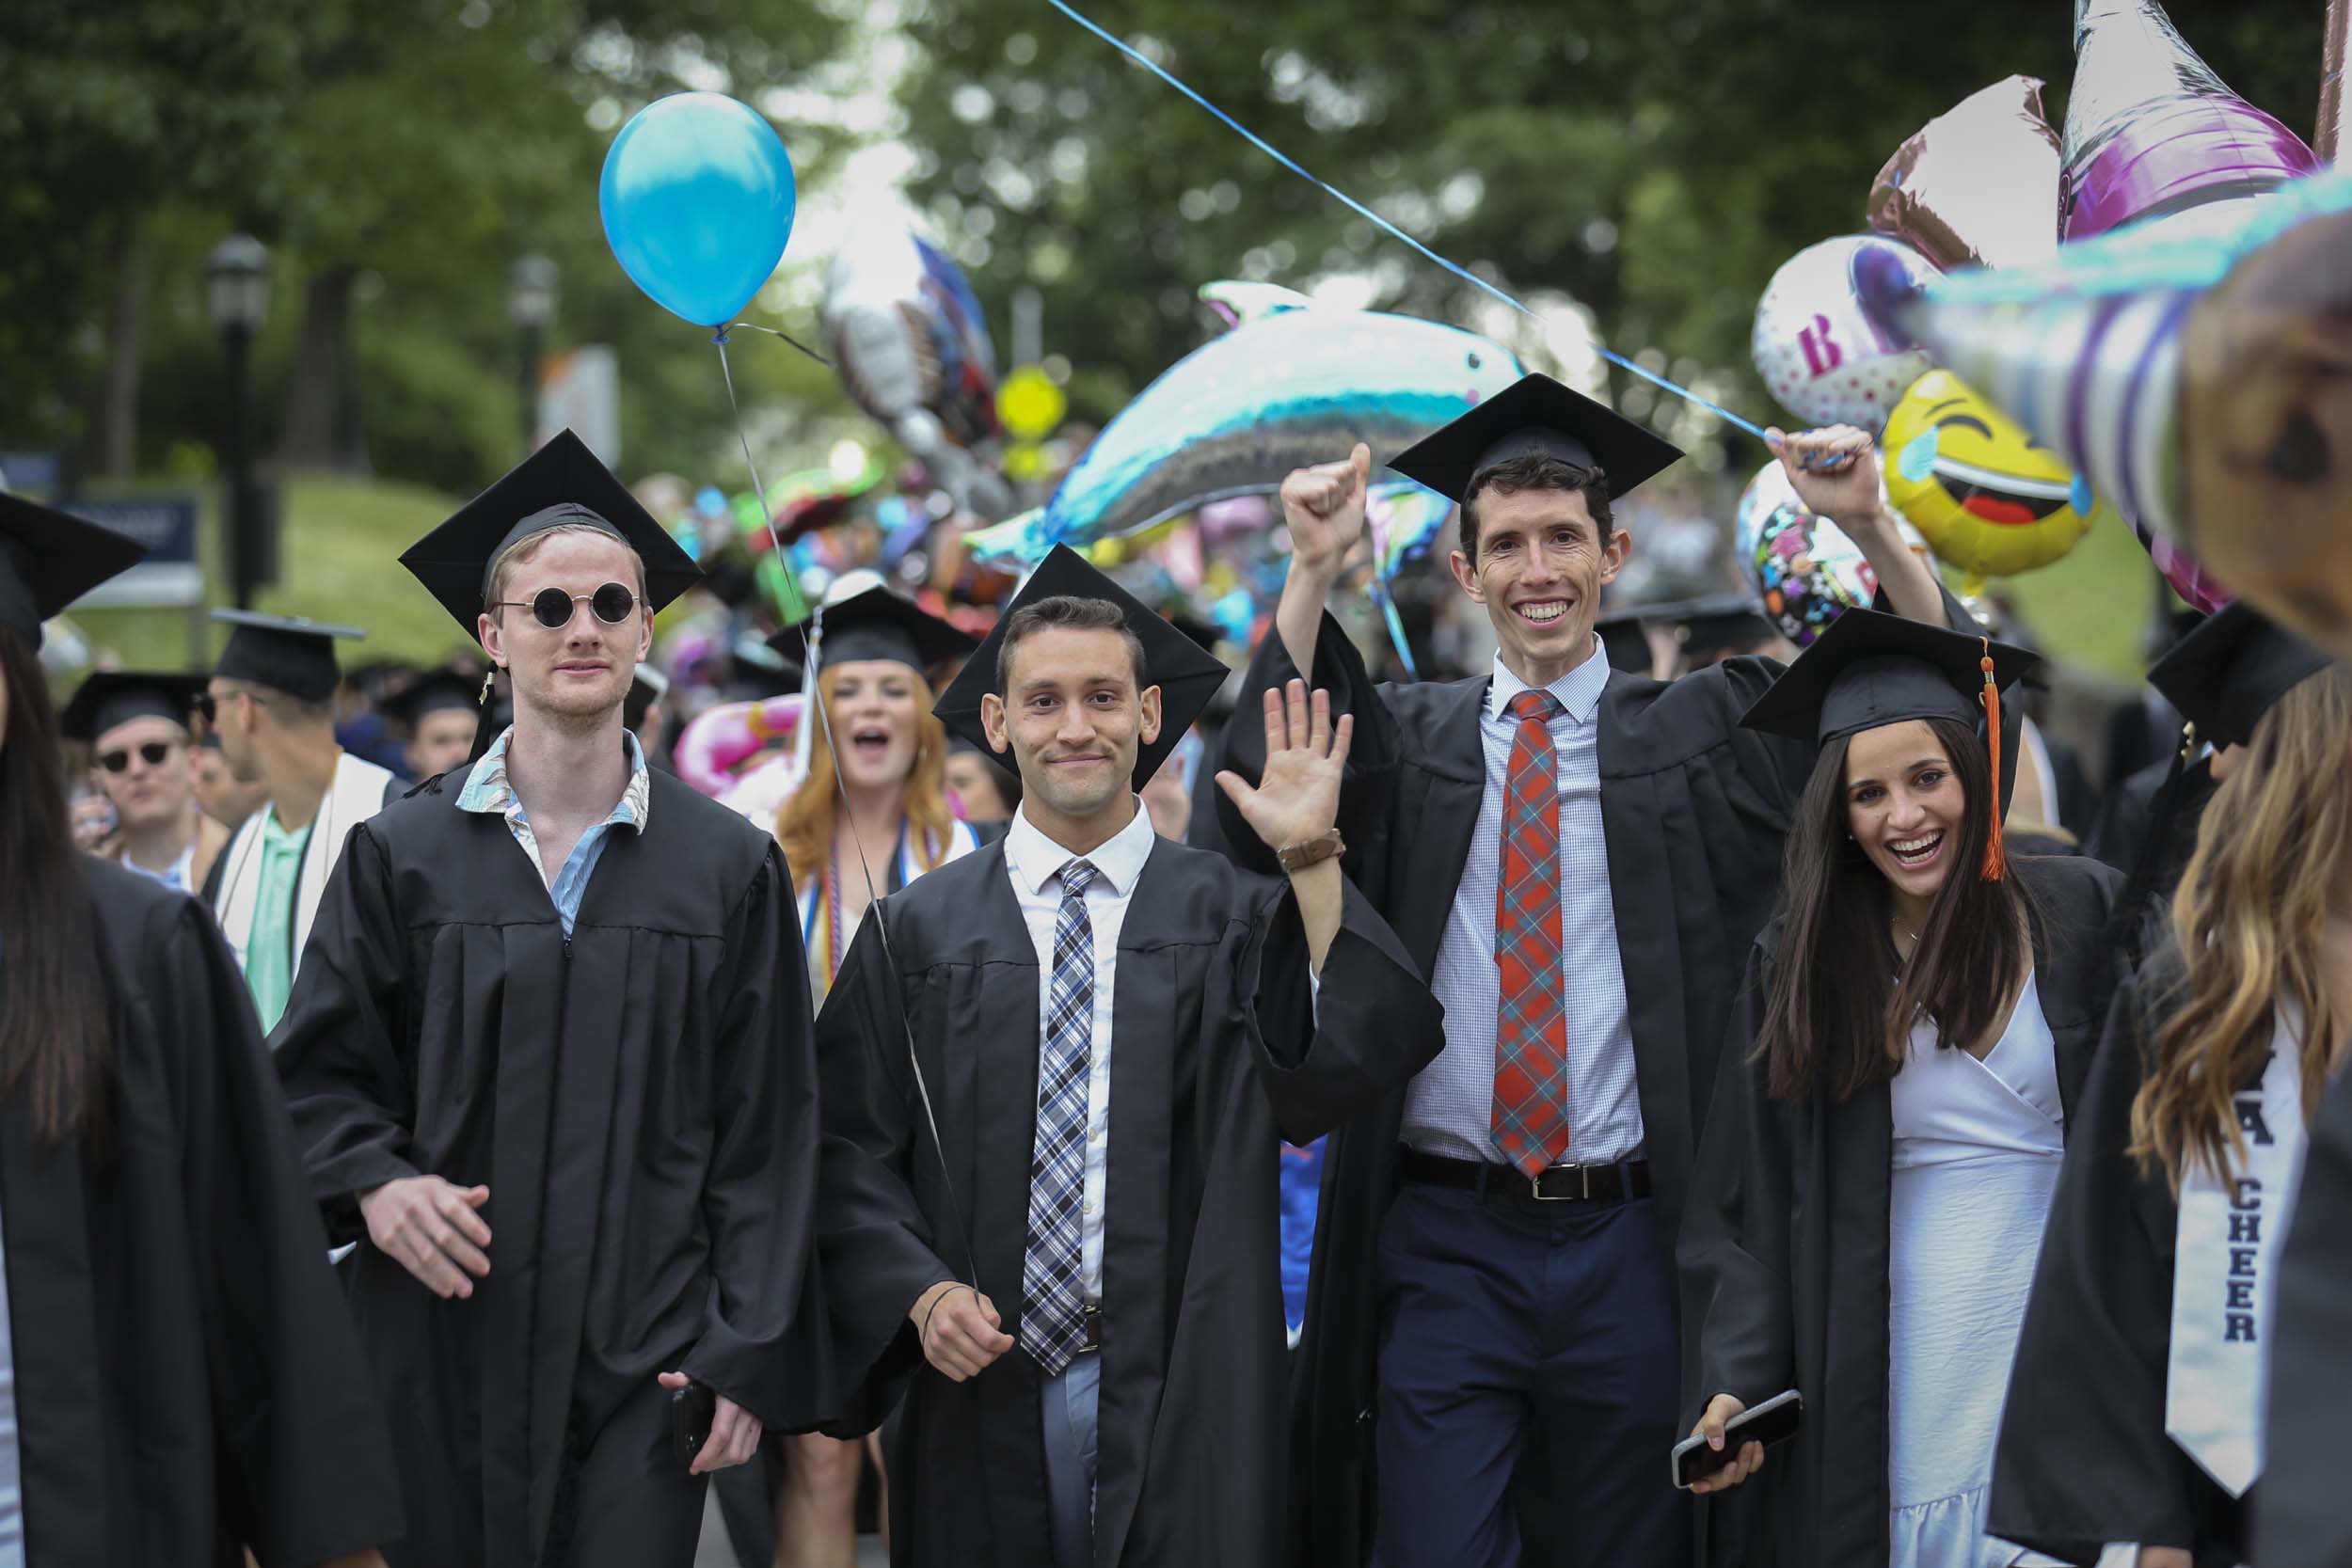 Graduates walking and smiling through Grounds while they carry various balloons